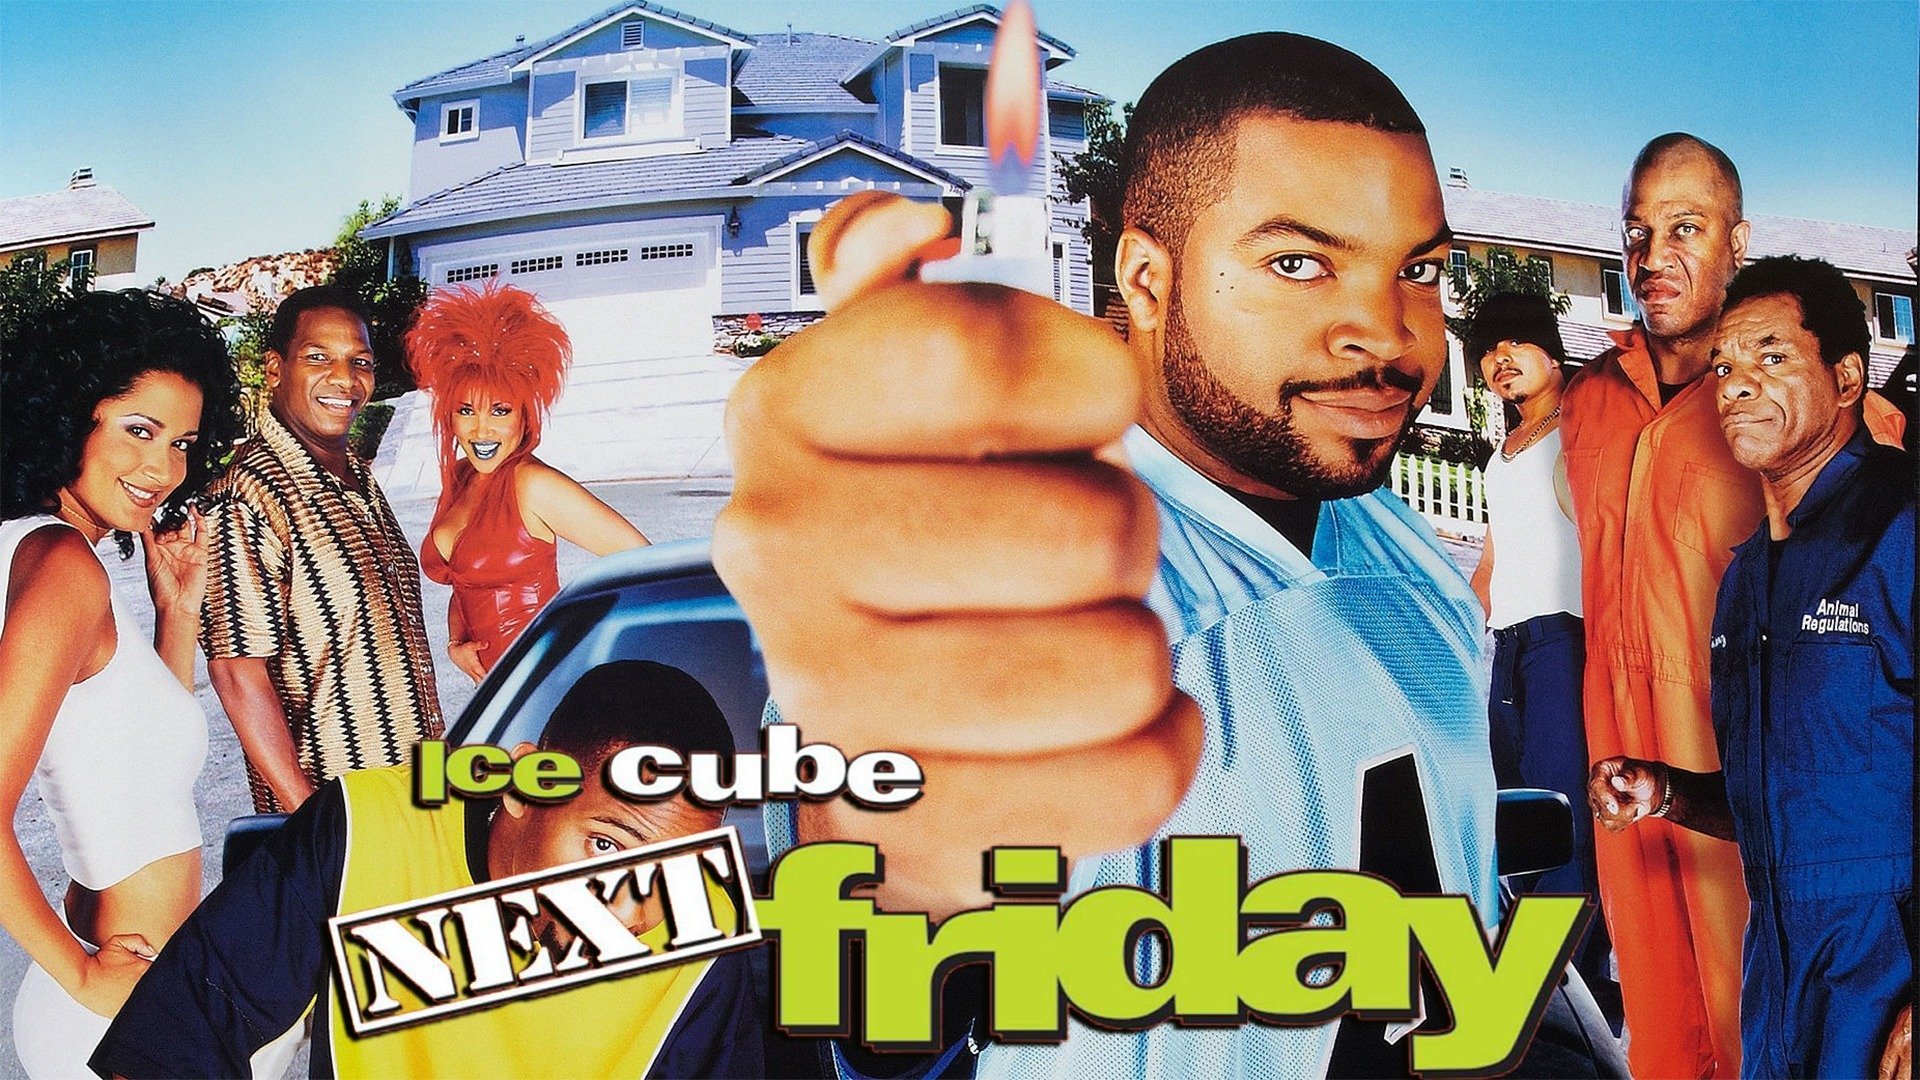 watch friday after next free online 123movies